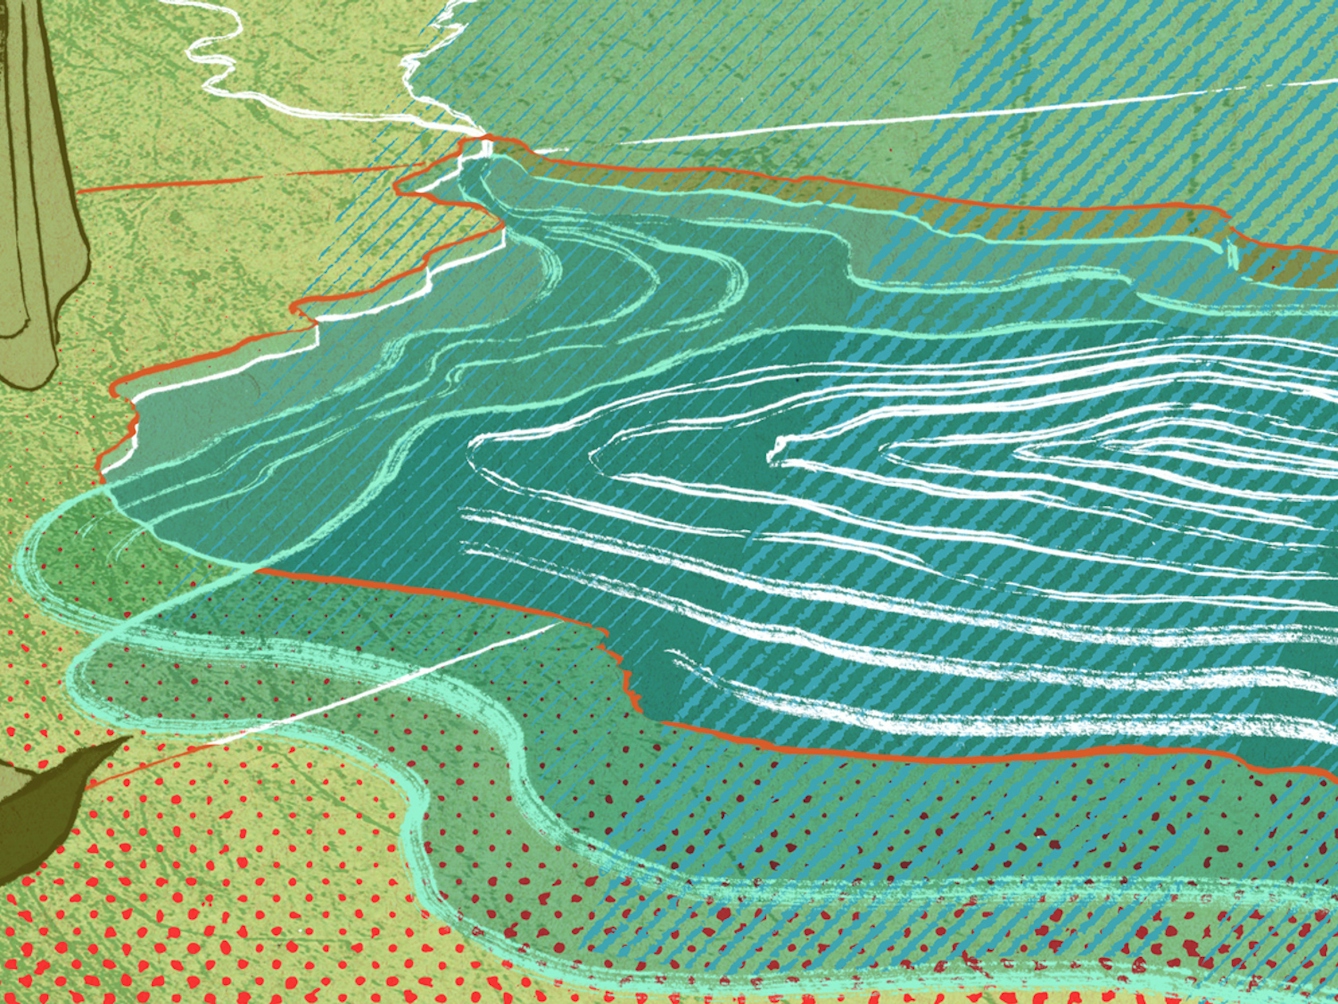 A digital illustration depicting Tulare Lake. From the illustration you can see the rivers flowing to it as well as the different water levels of the lake. There are map-like red lines in surrounding the lake depicting the different borders of the land.